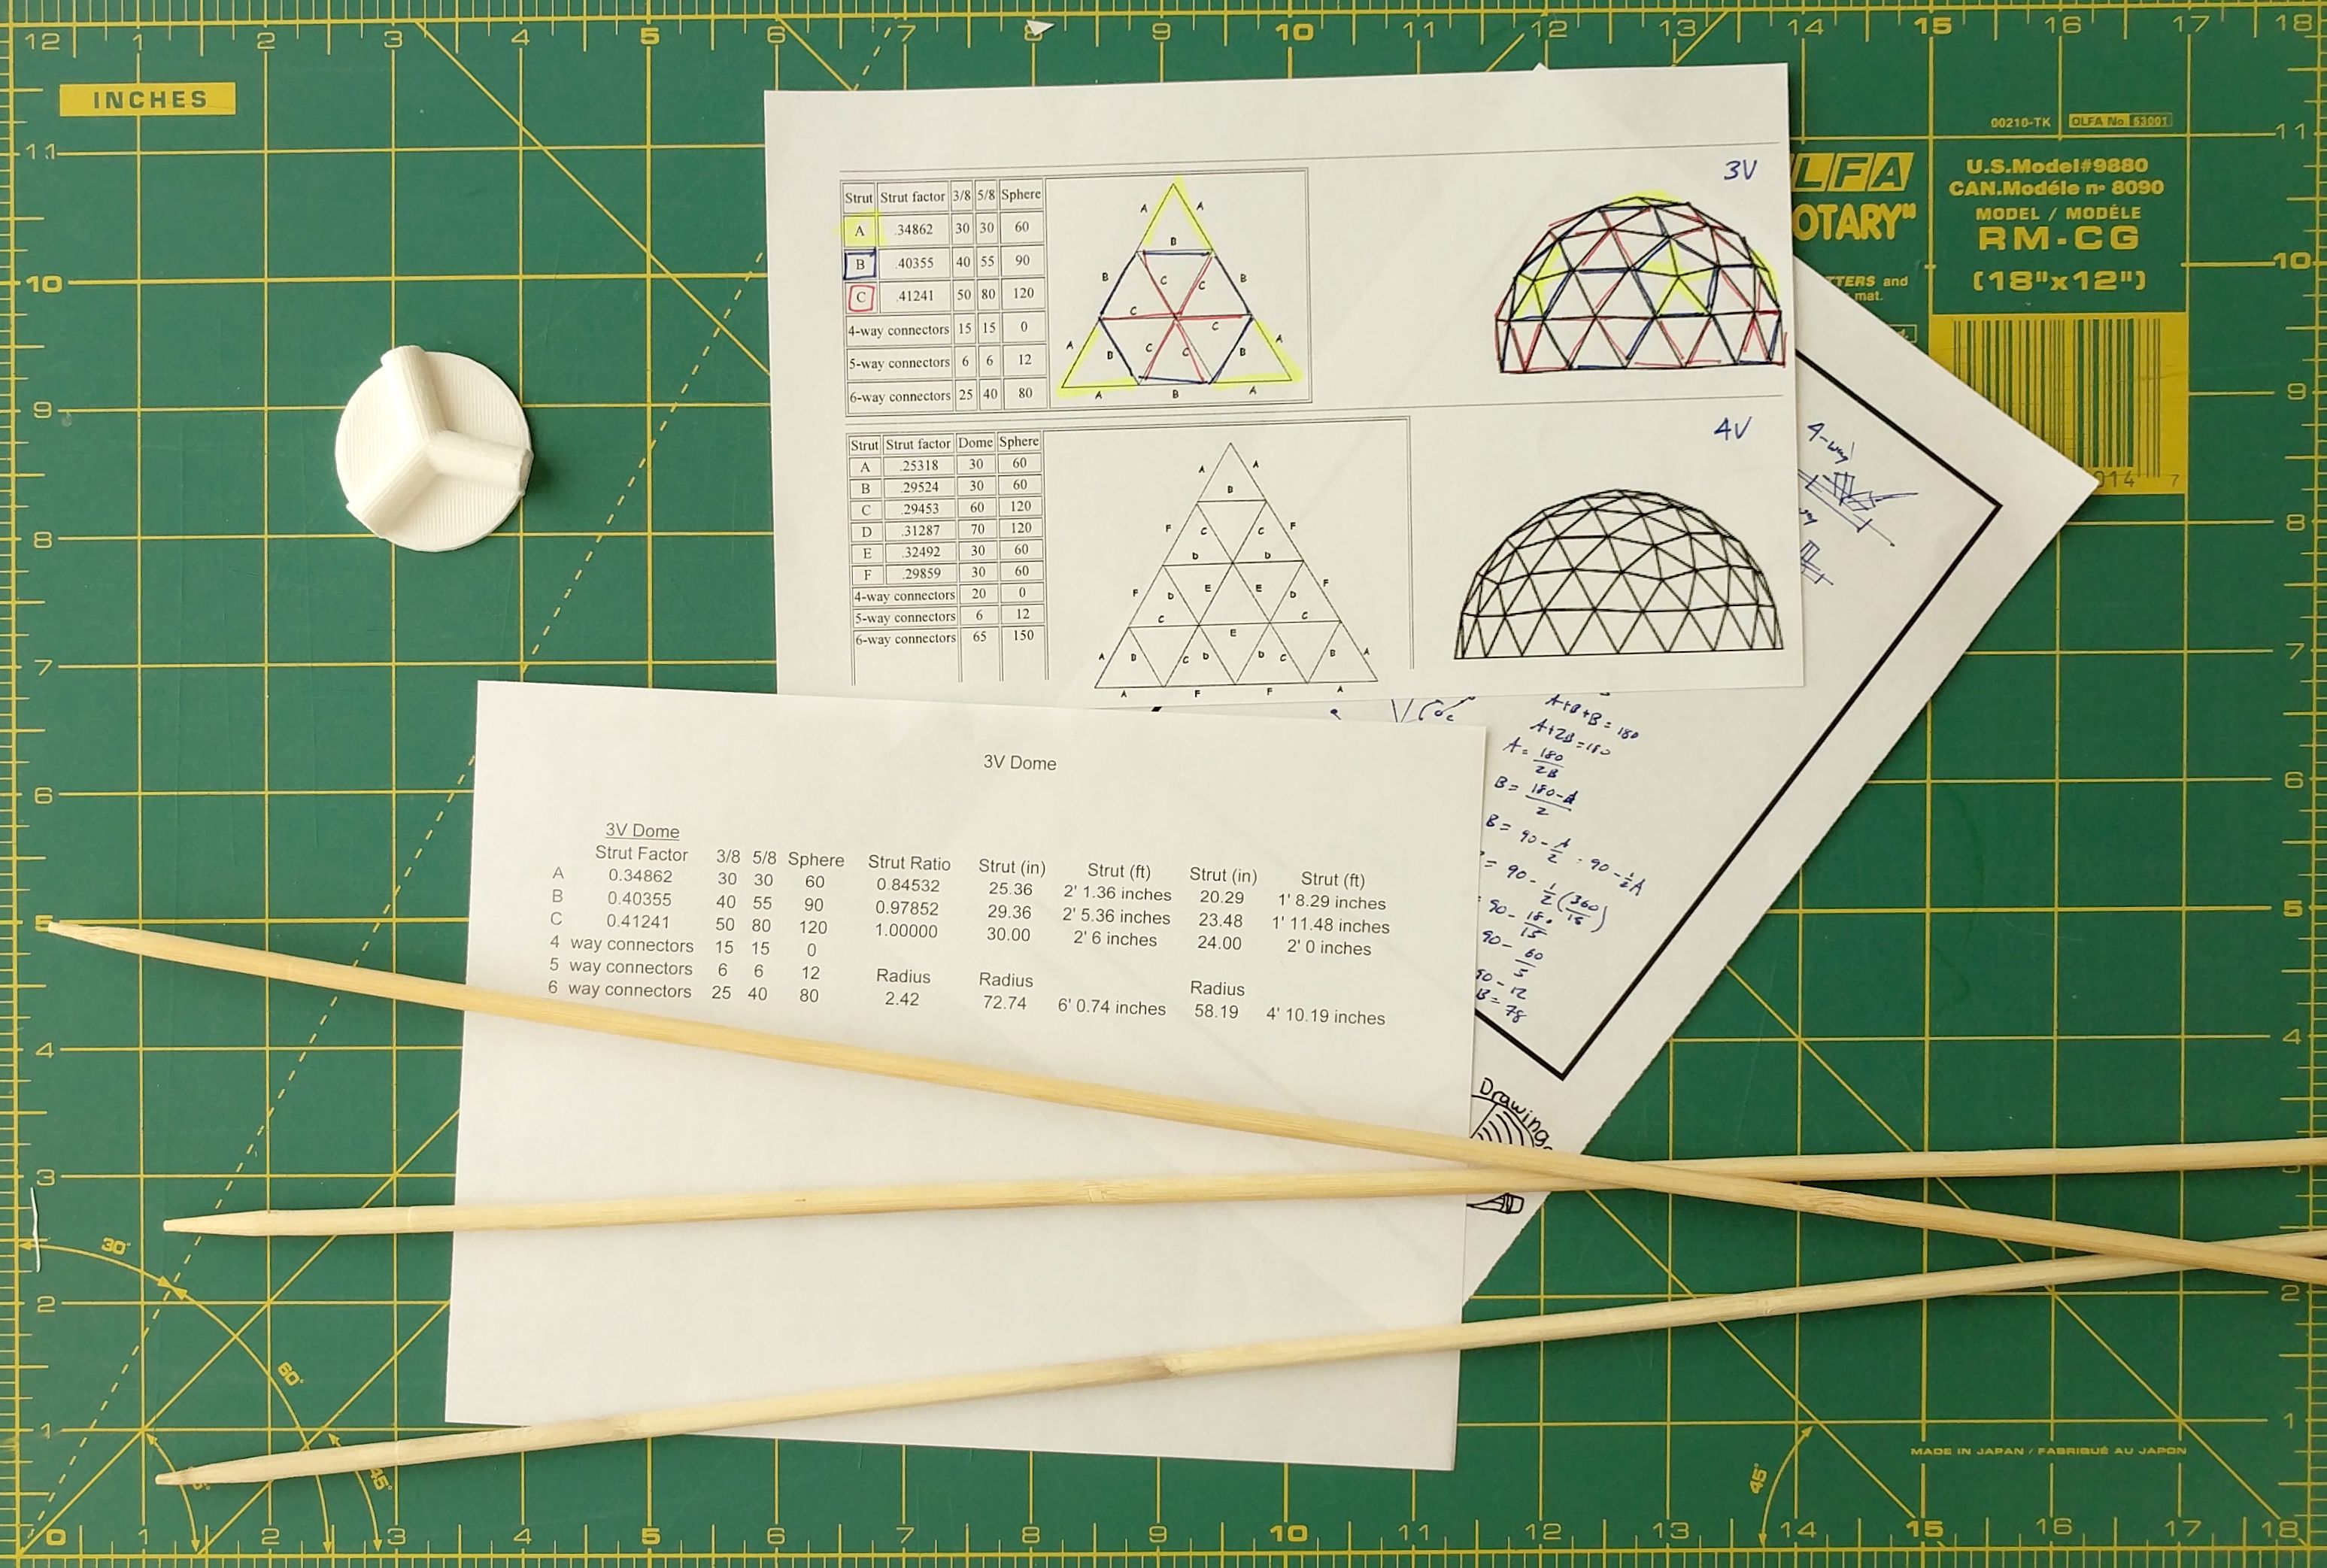 5mm Bamboo Skewer Connectors for a Geodesic Dome